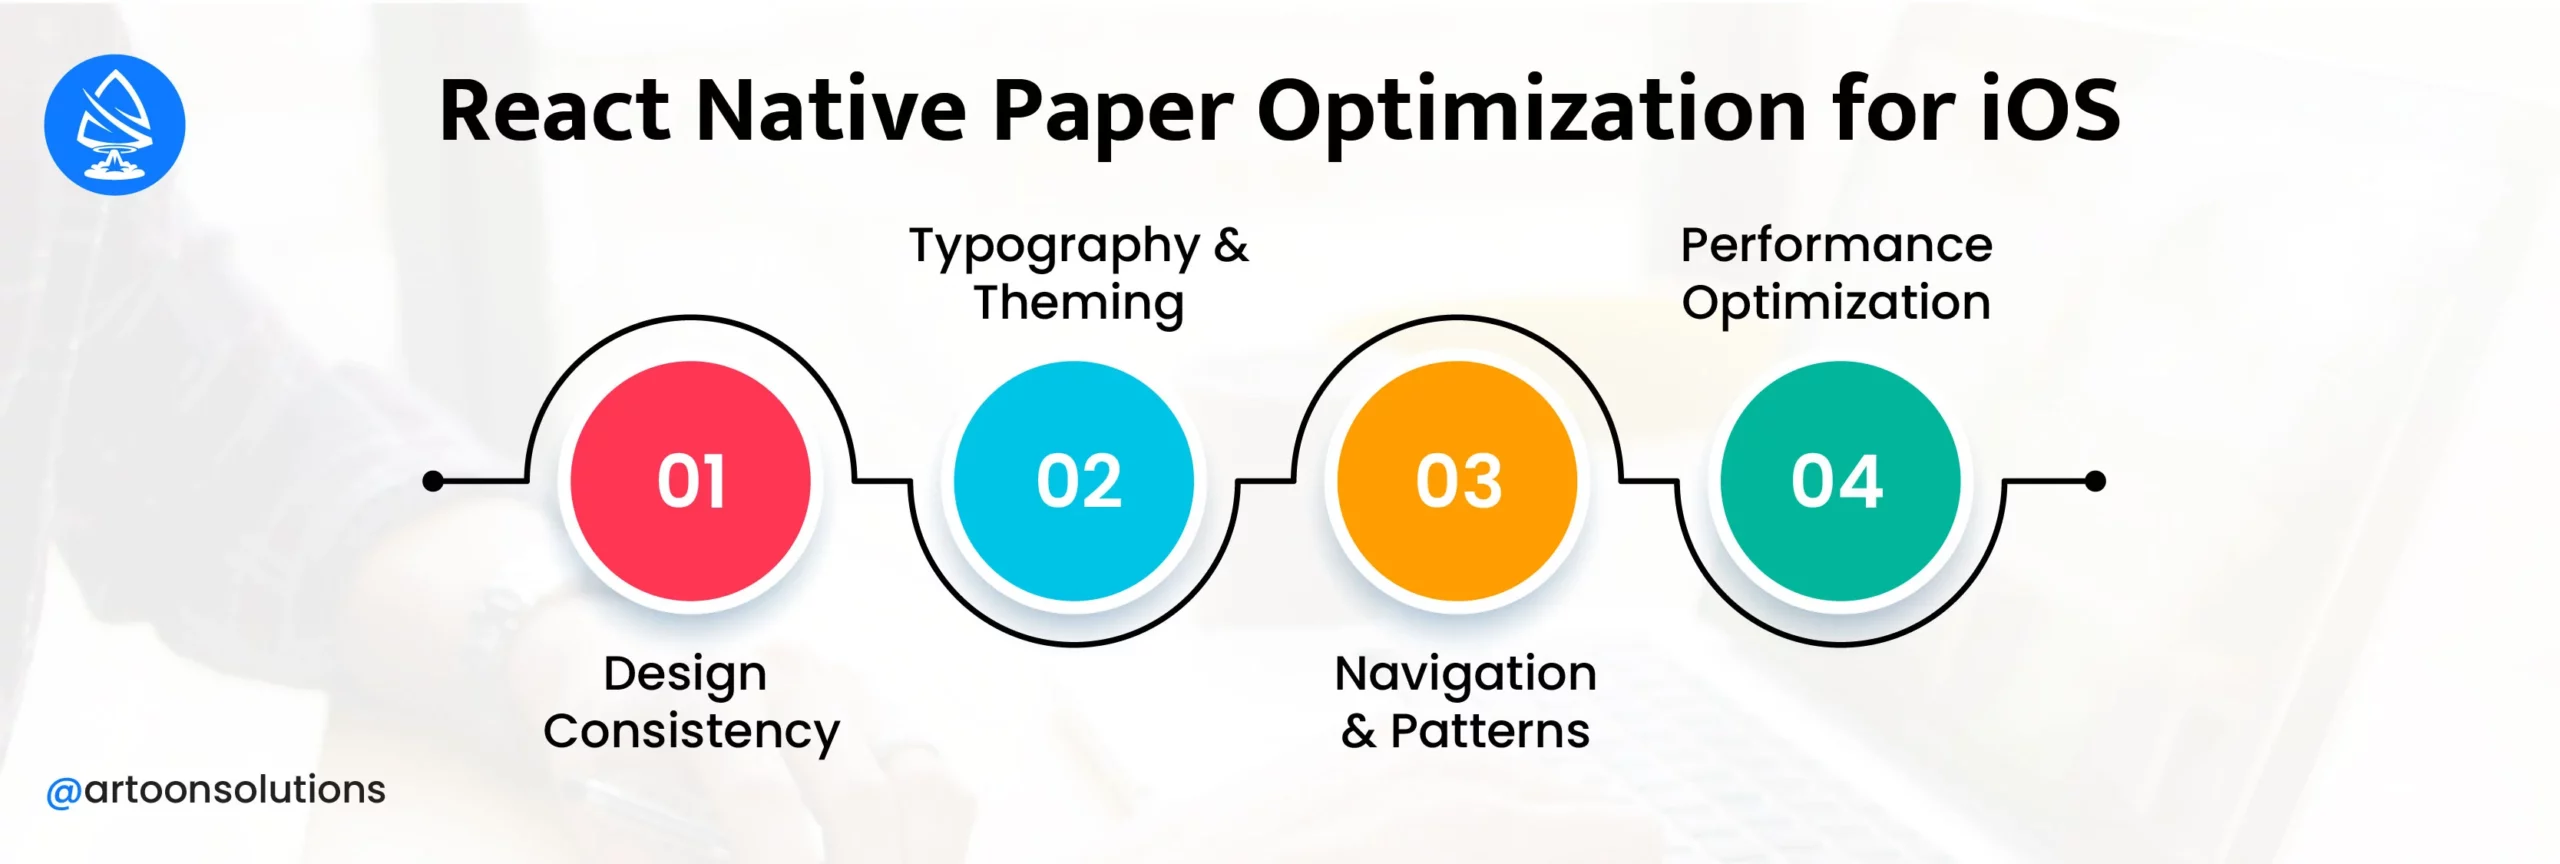 React Native Paper Optimization for iOS